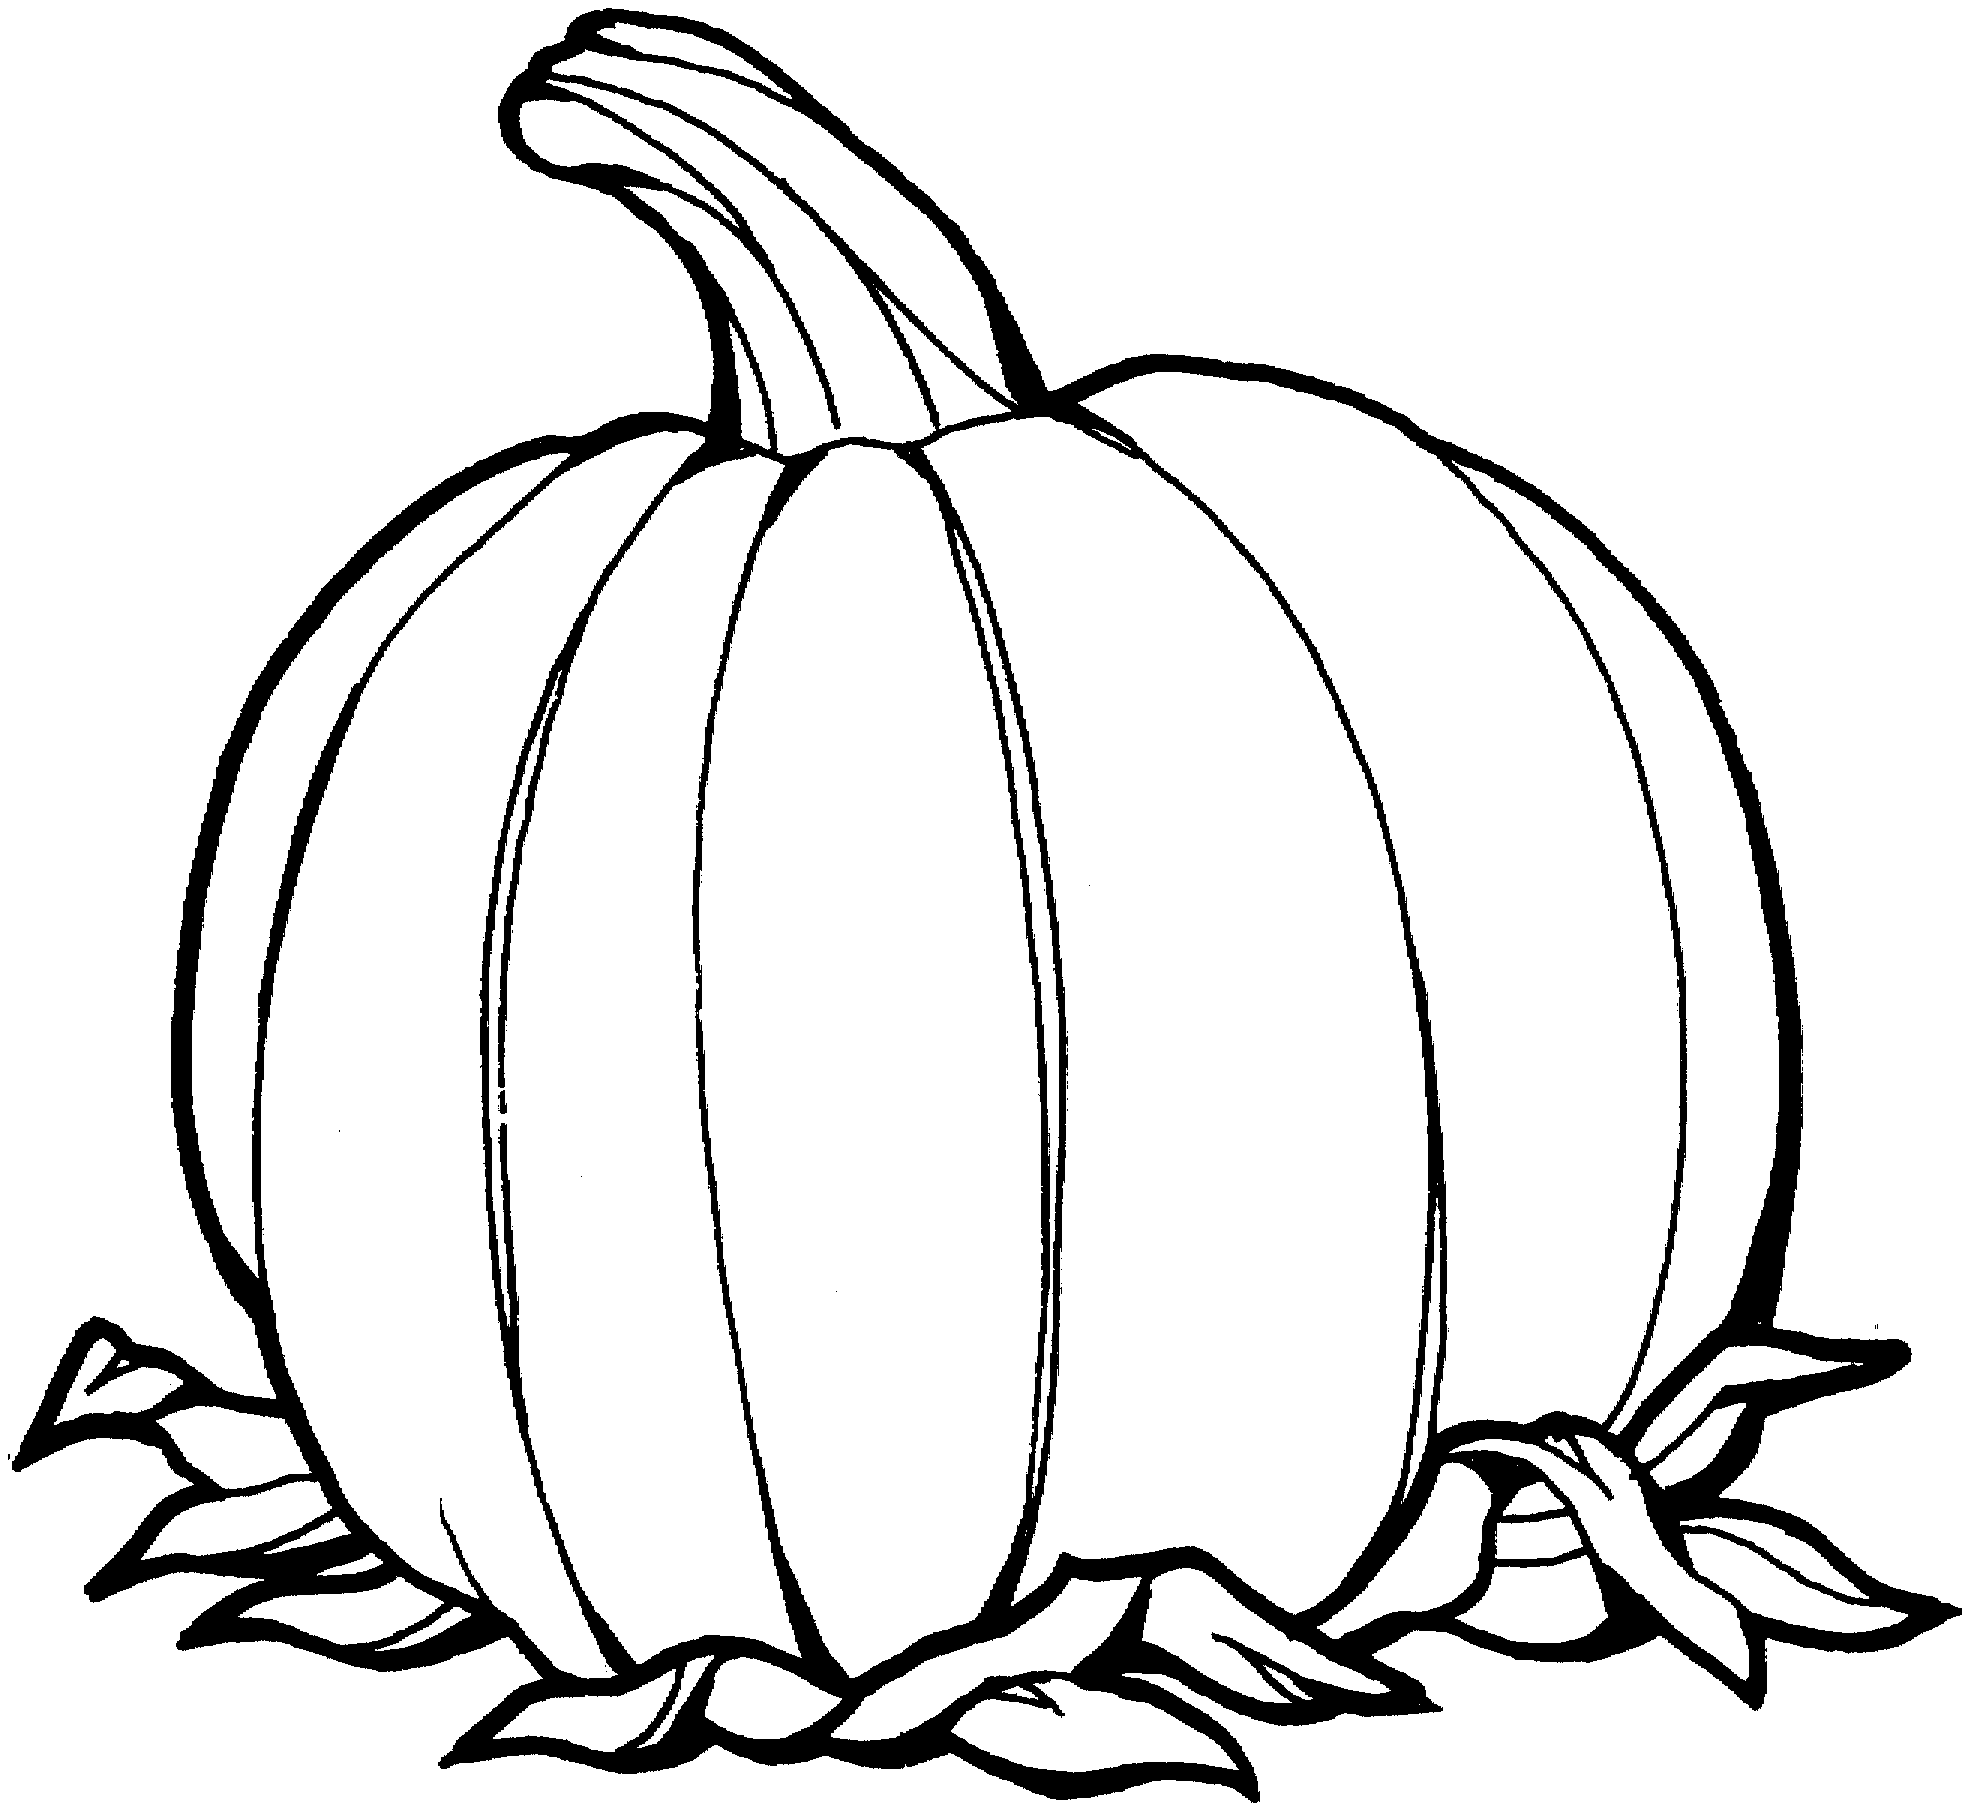 Halloween black and white halloween clip art black and white 2